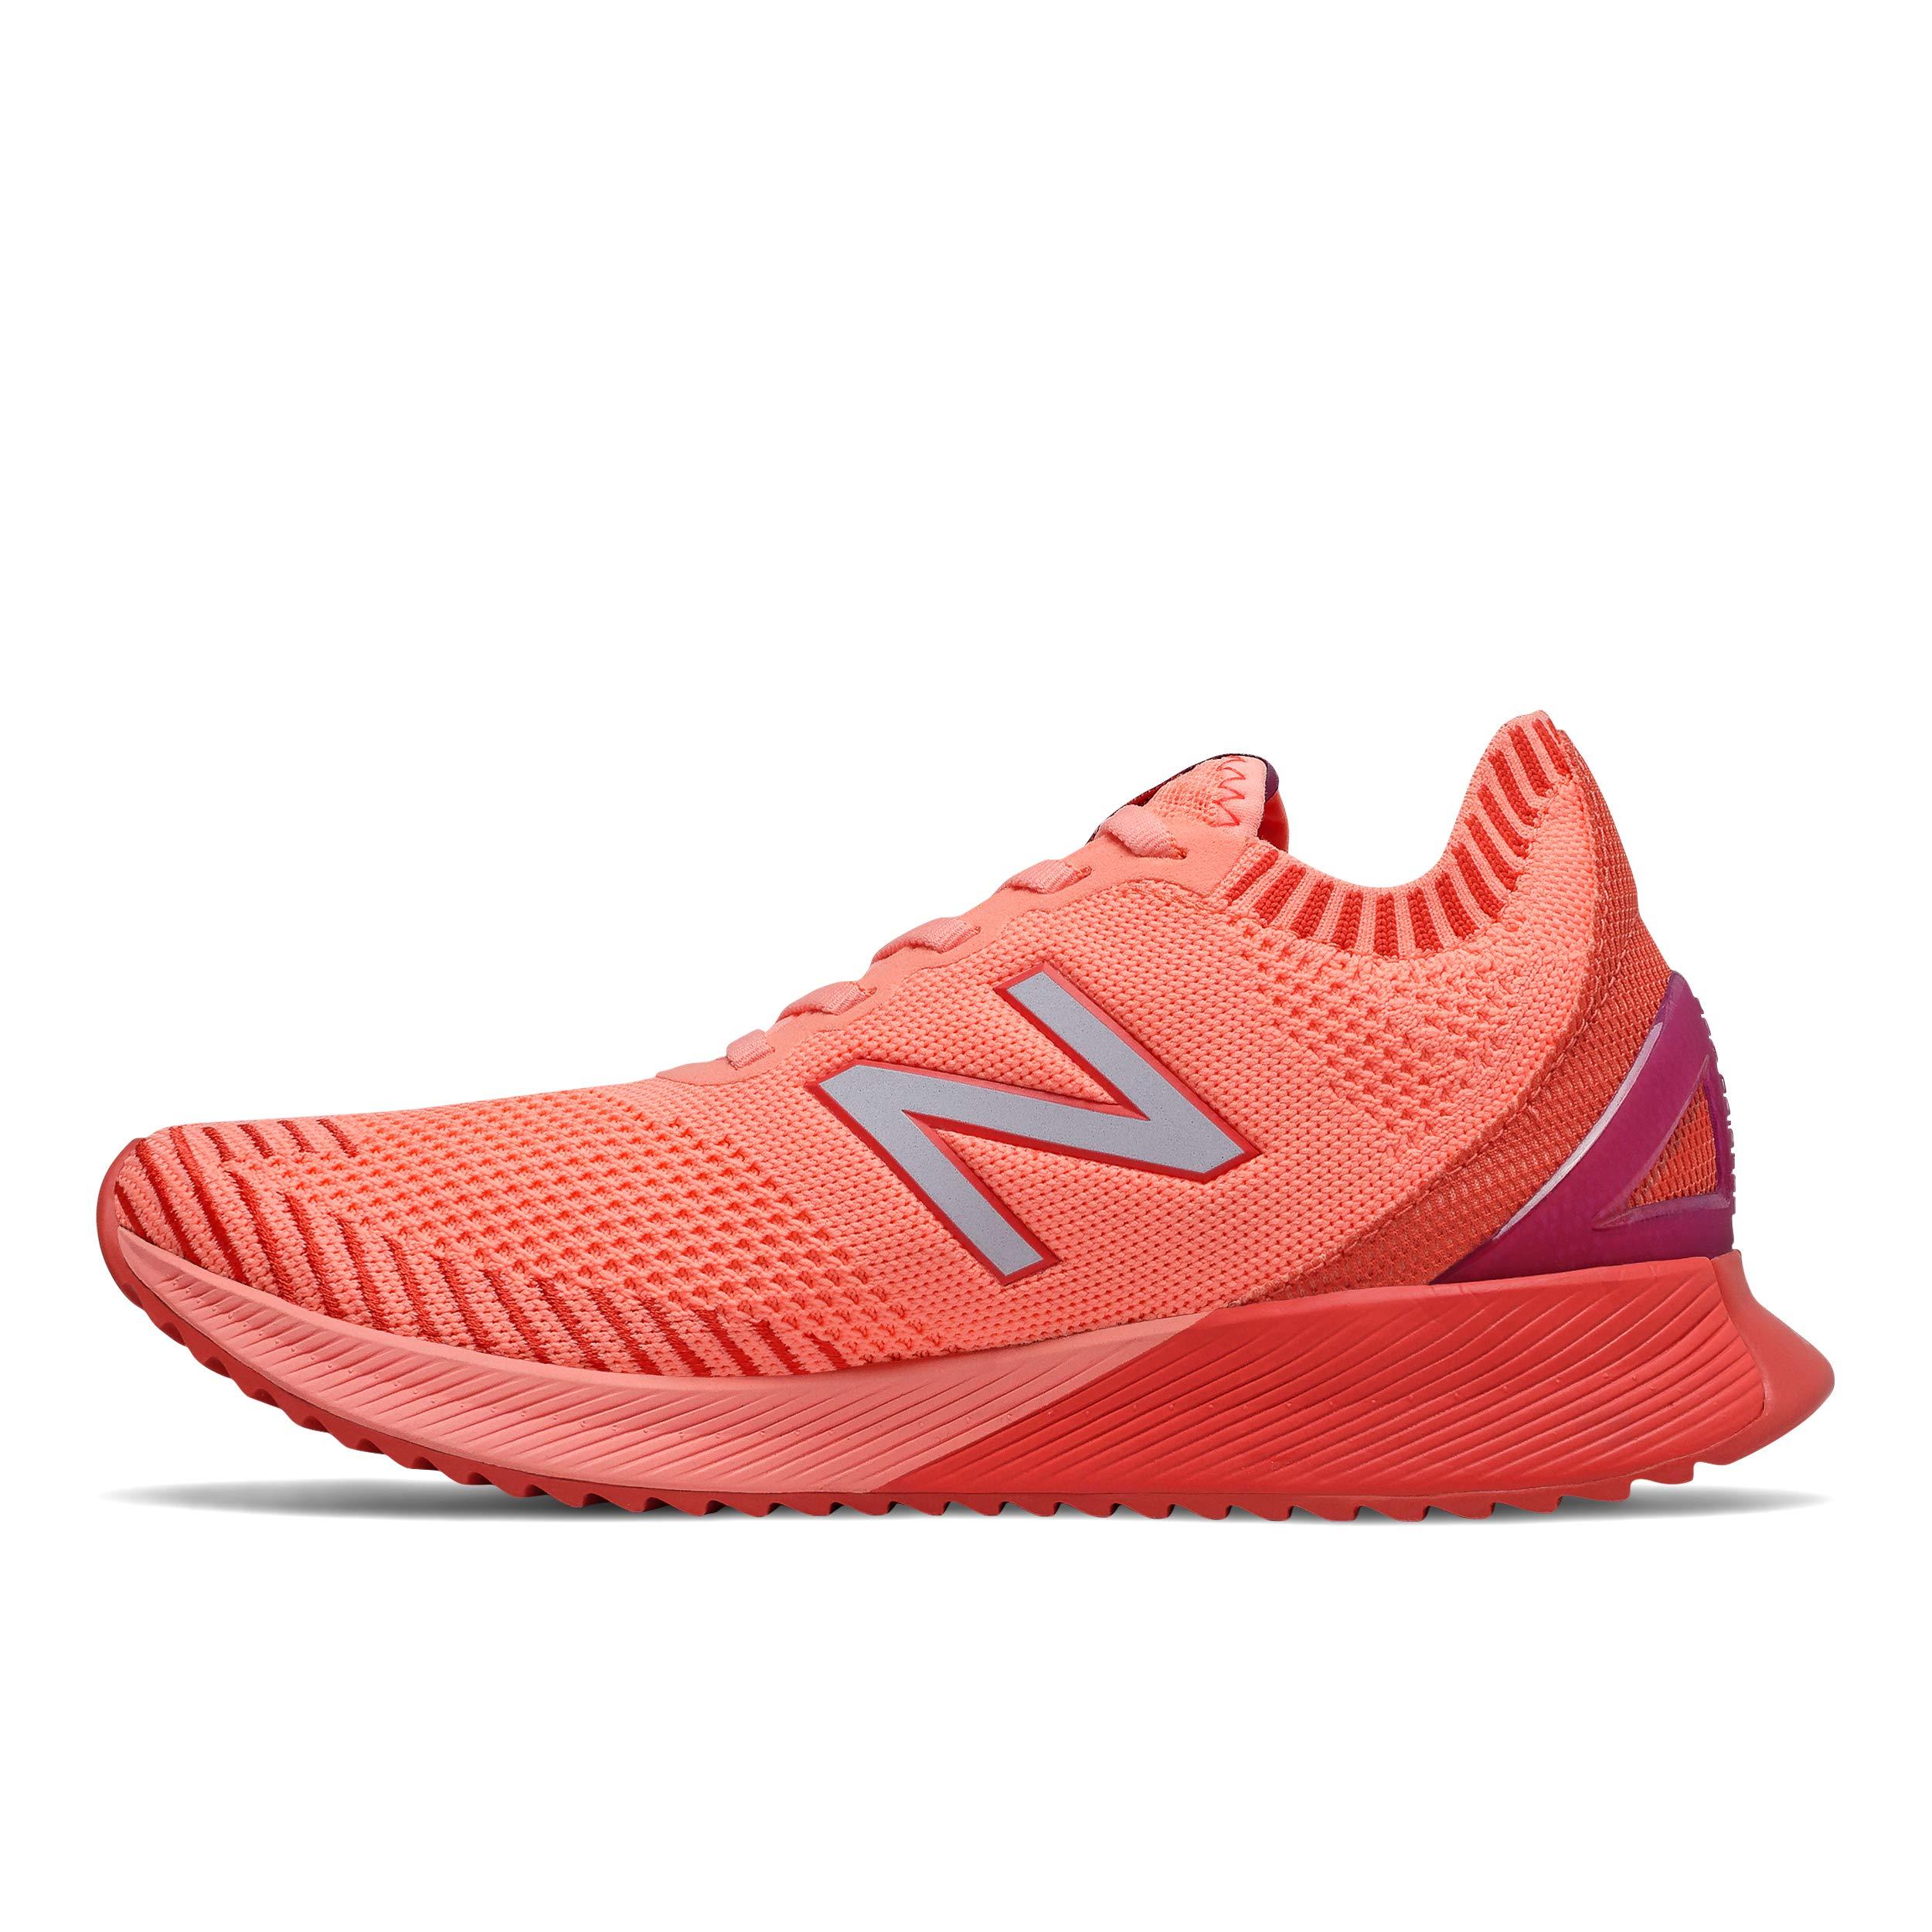 New Balance Rubber Echo V1 Fuelcell Walking Shoe in Coral (Pink ...